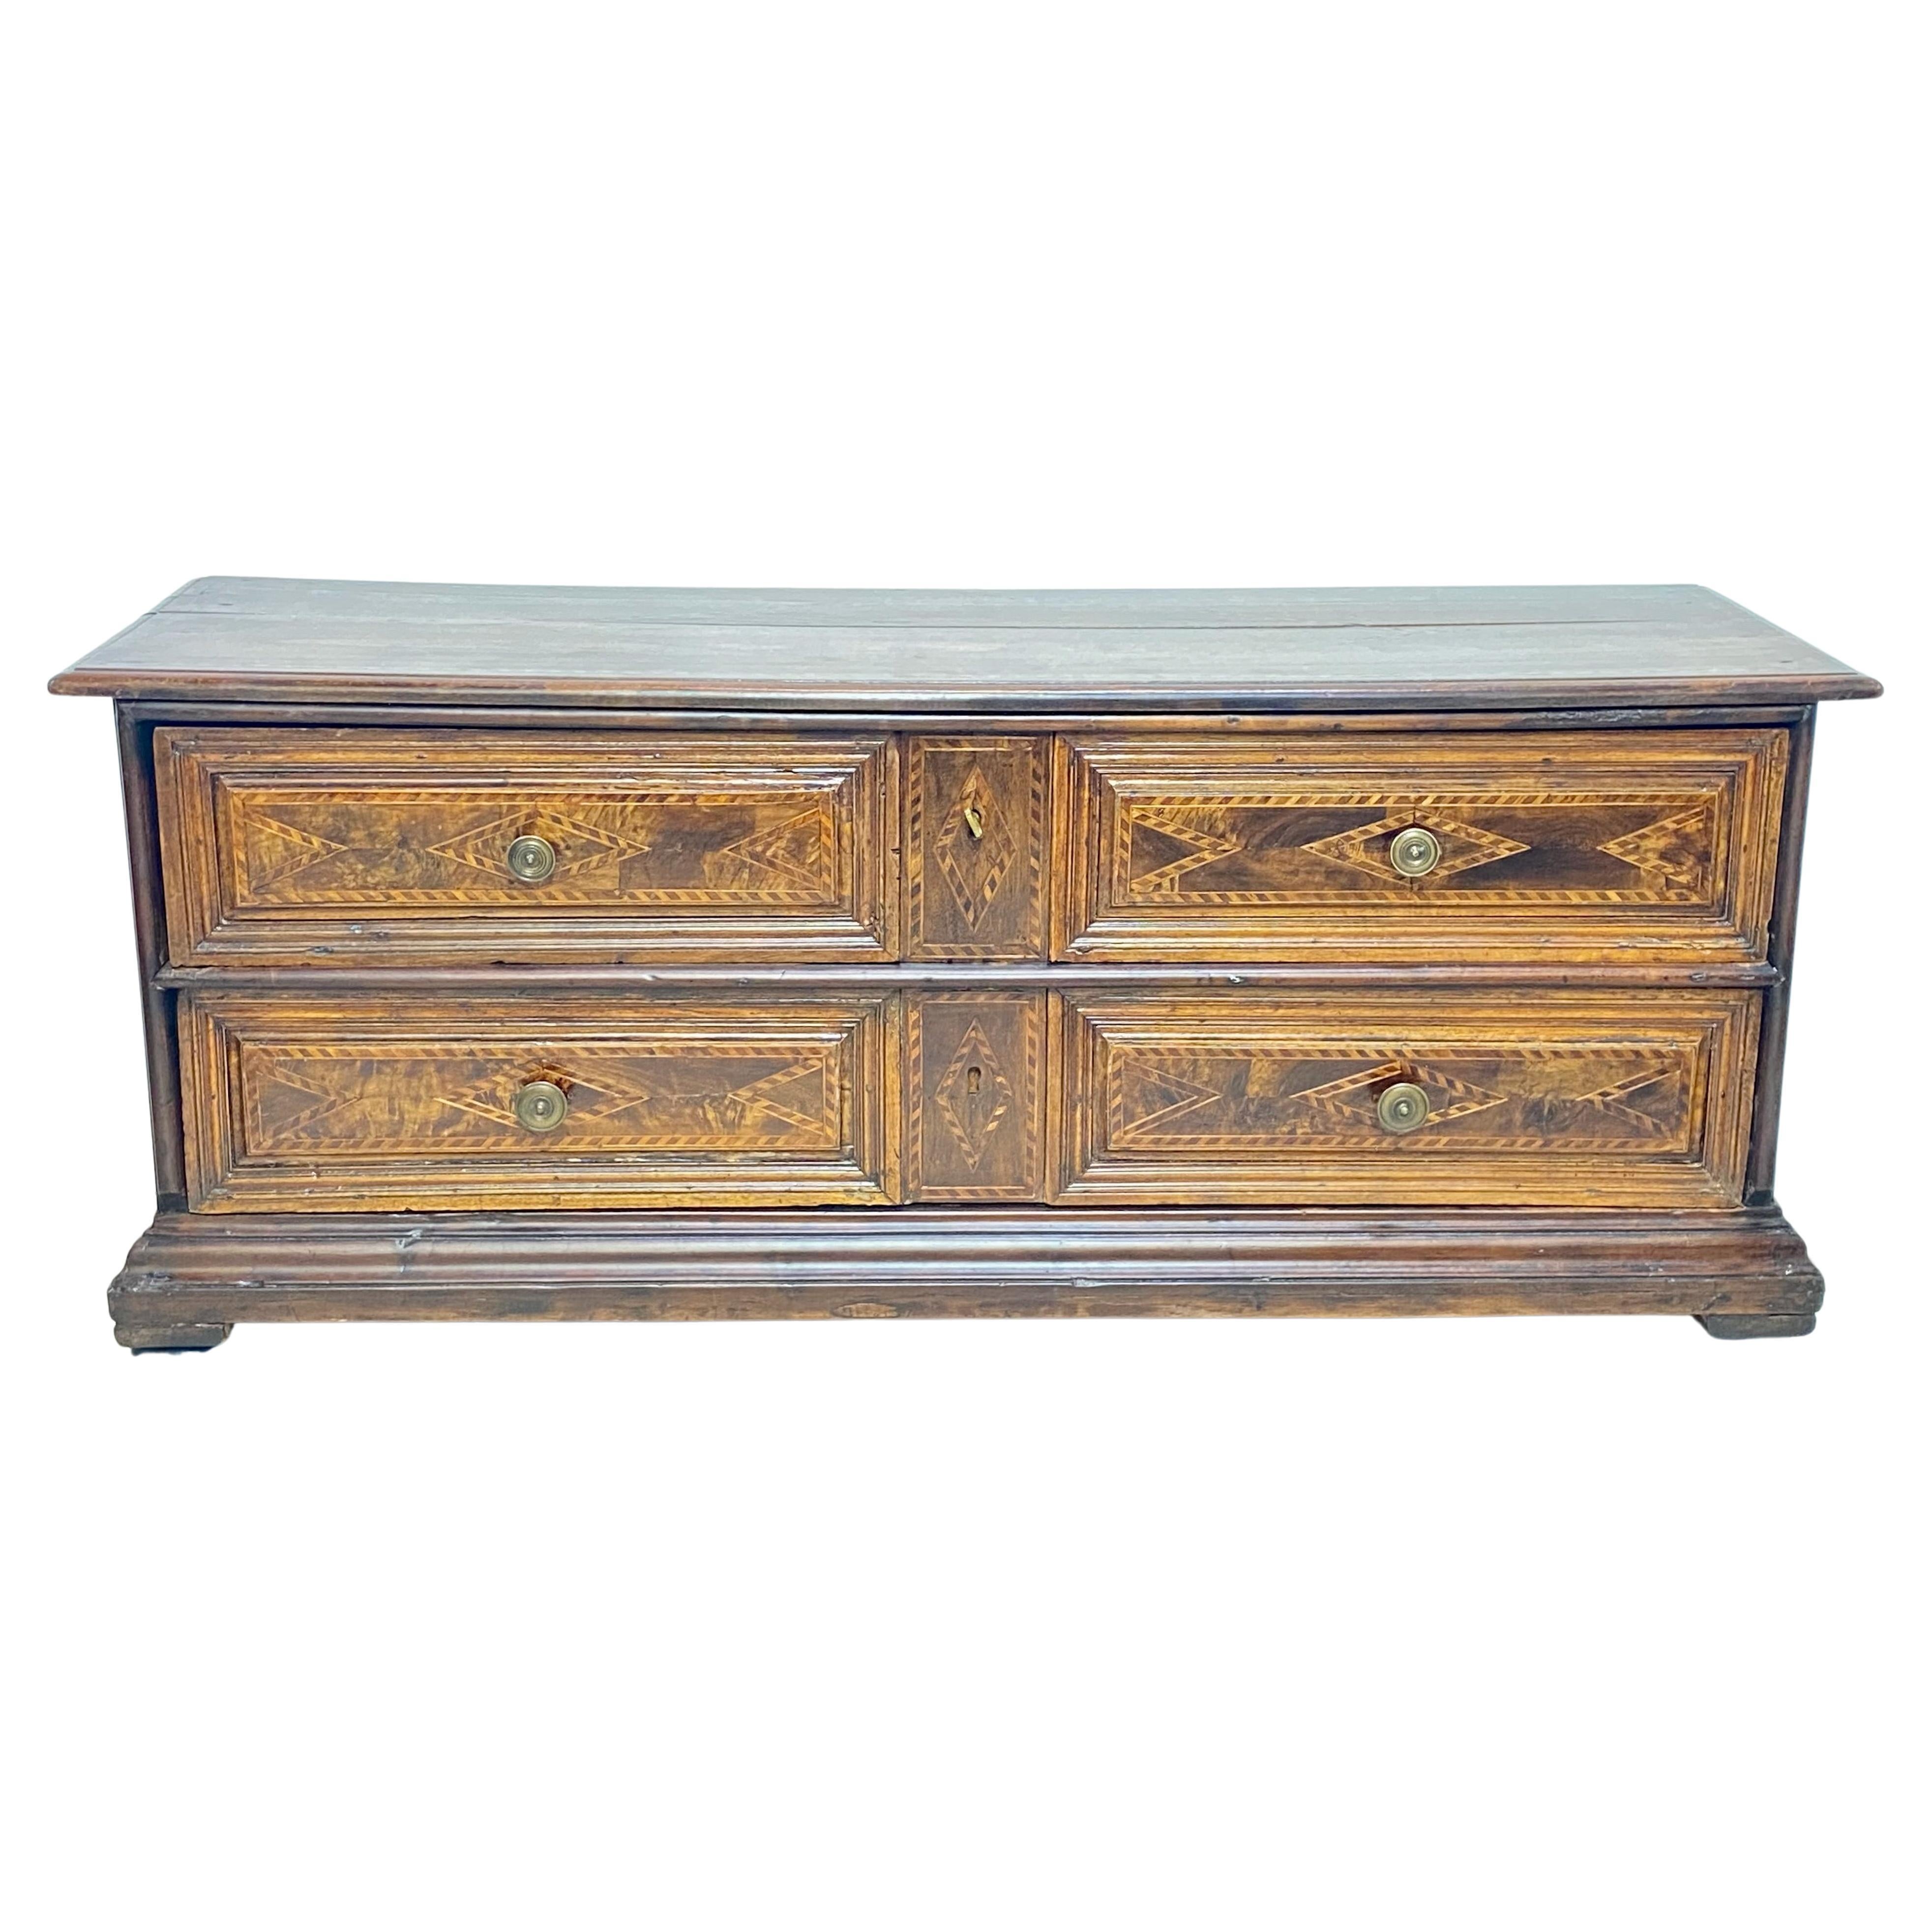 Early 18th Century Italian Walnut Low Two Drawer Chest / Bench For Sale